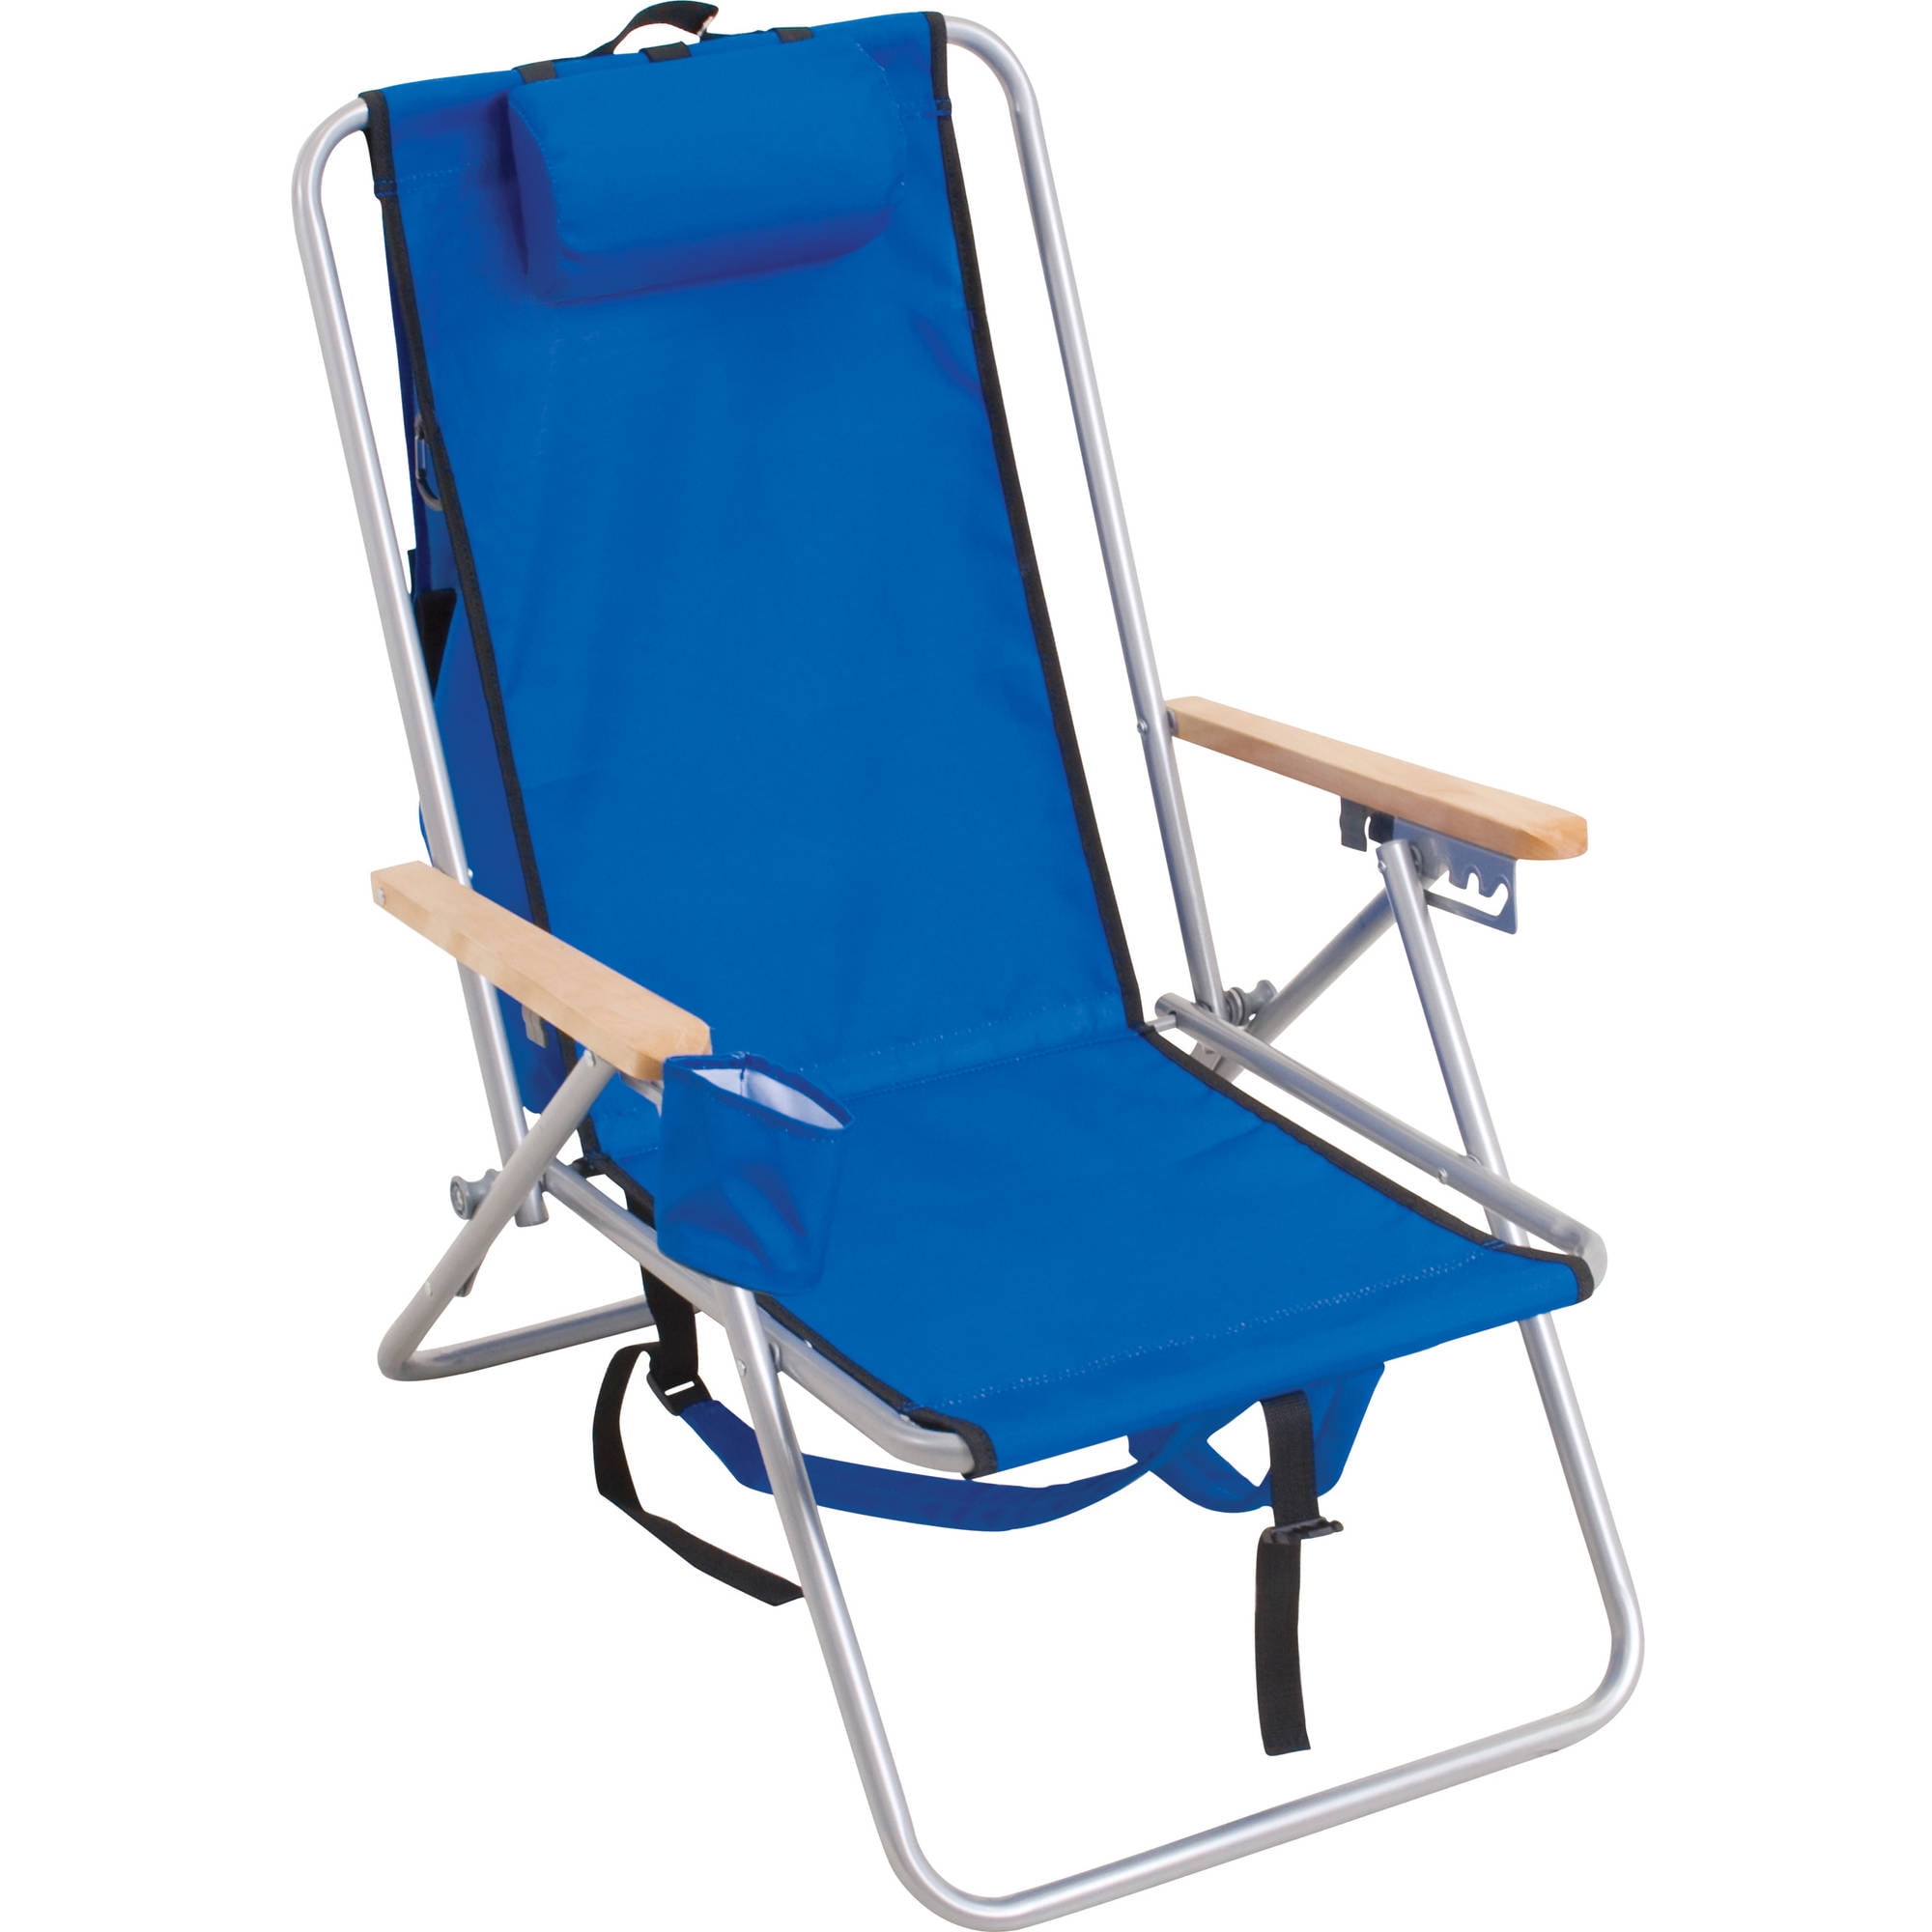 Simple Folding Beach Lounge Chair for Simple Design